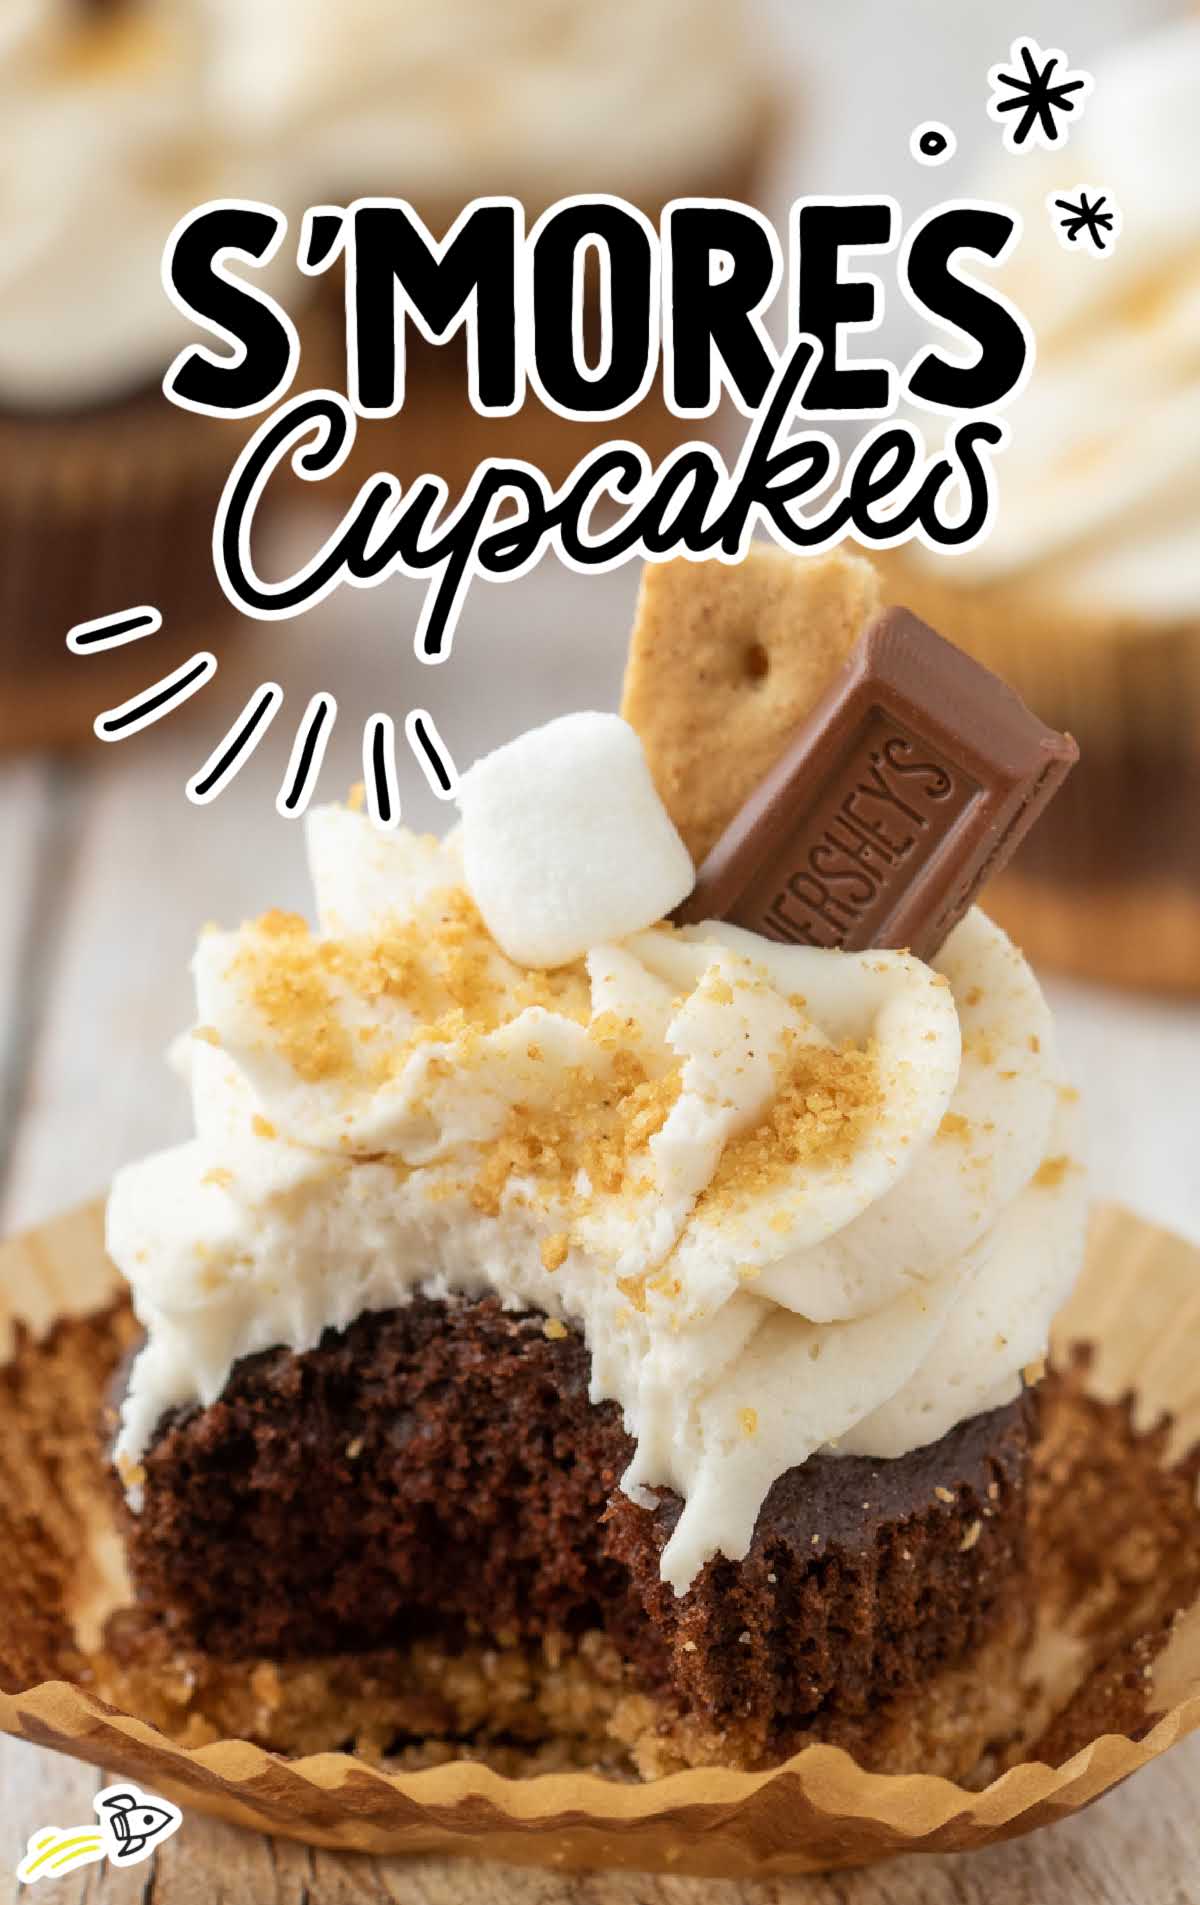 a close up shot of a S’mores Cupcake with a bite taken out of it